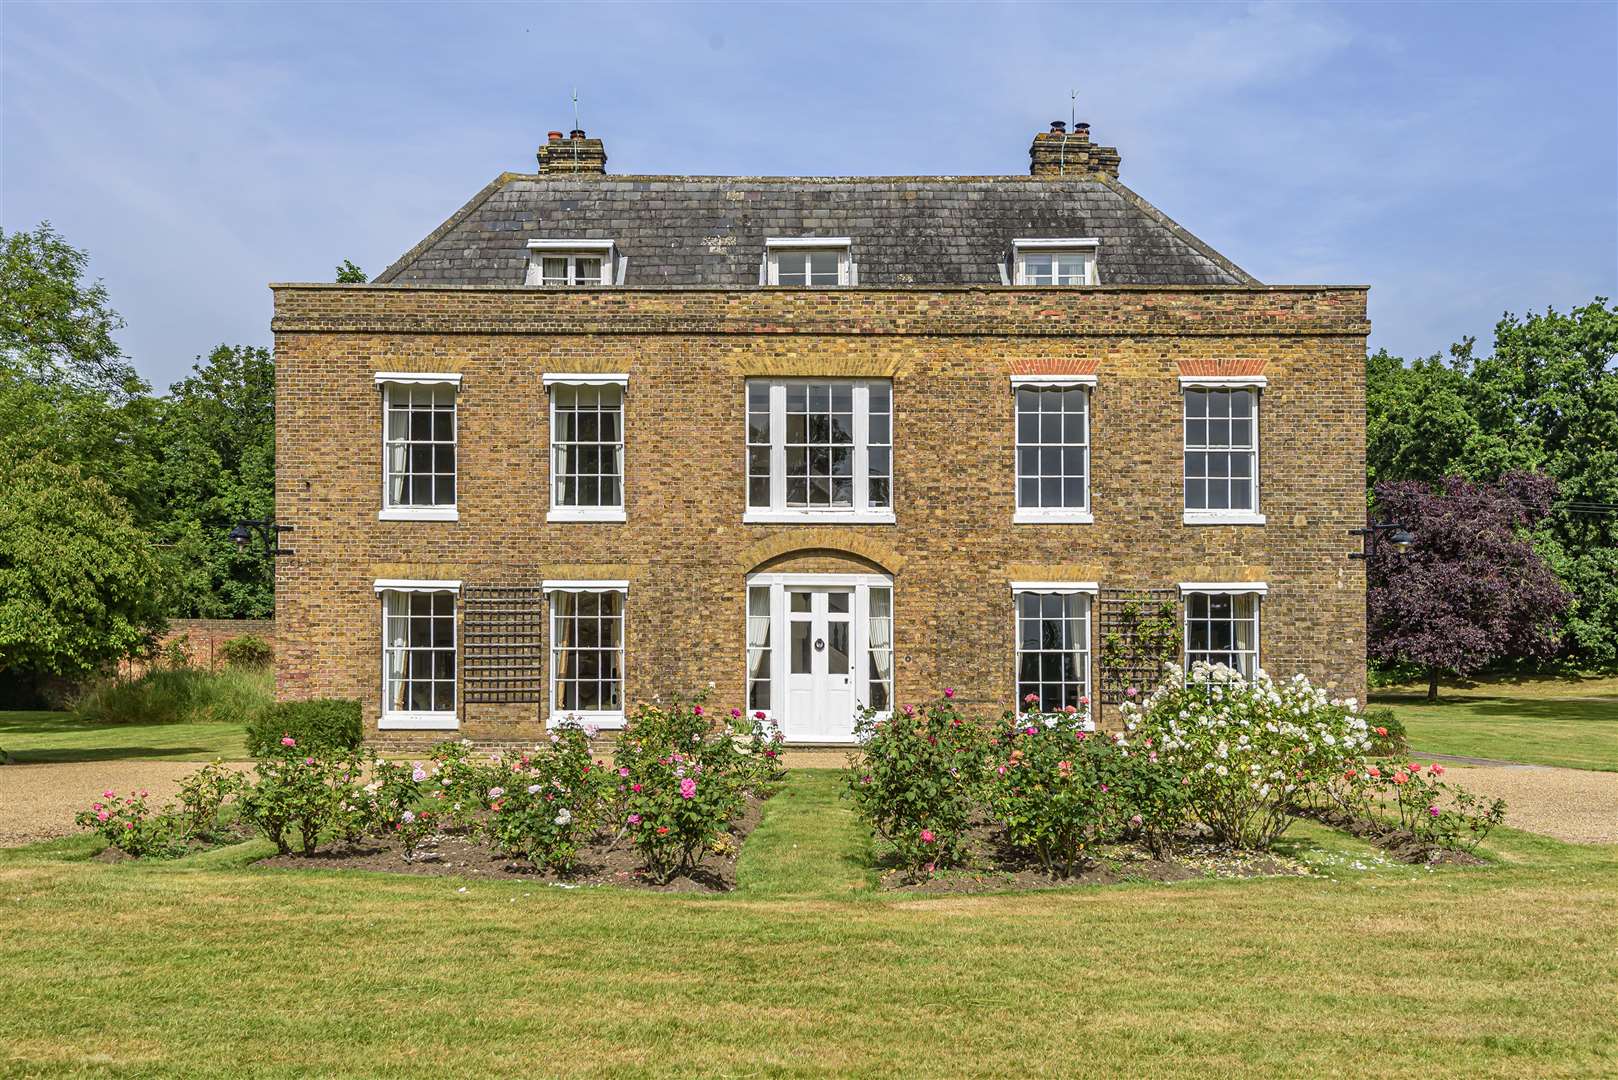 Stately mansion up for sale for £2.25 million. Pic: Niche photography